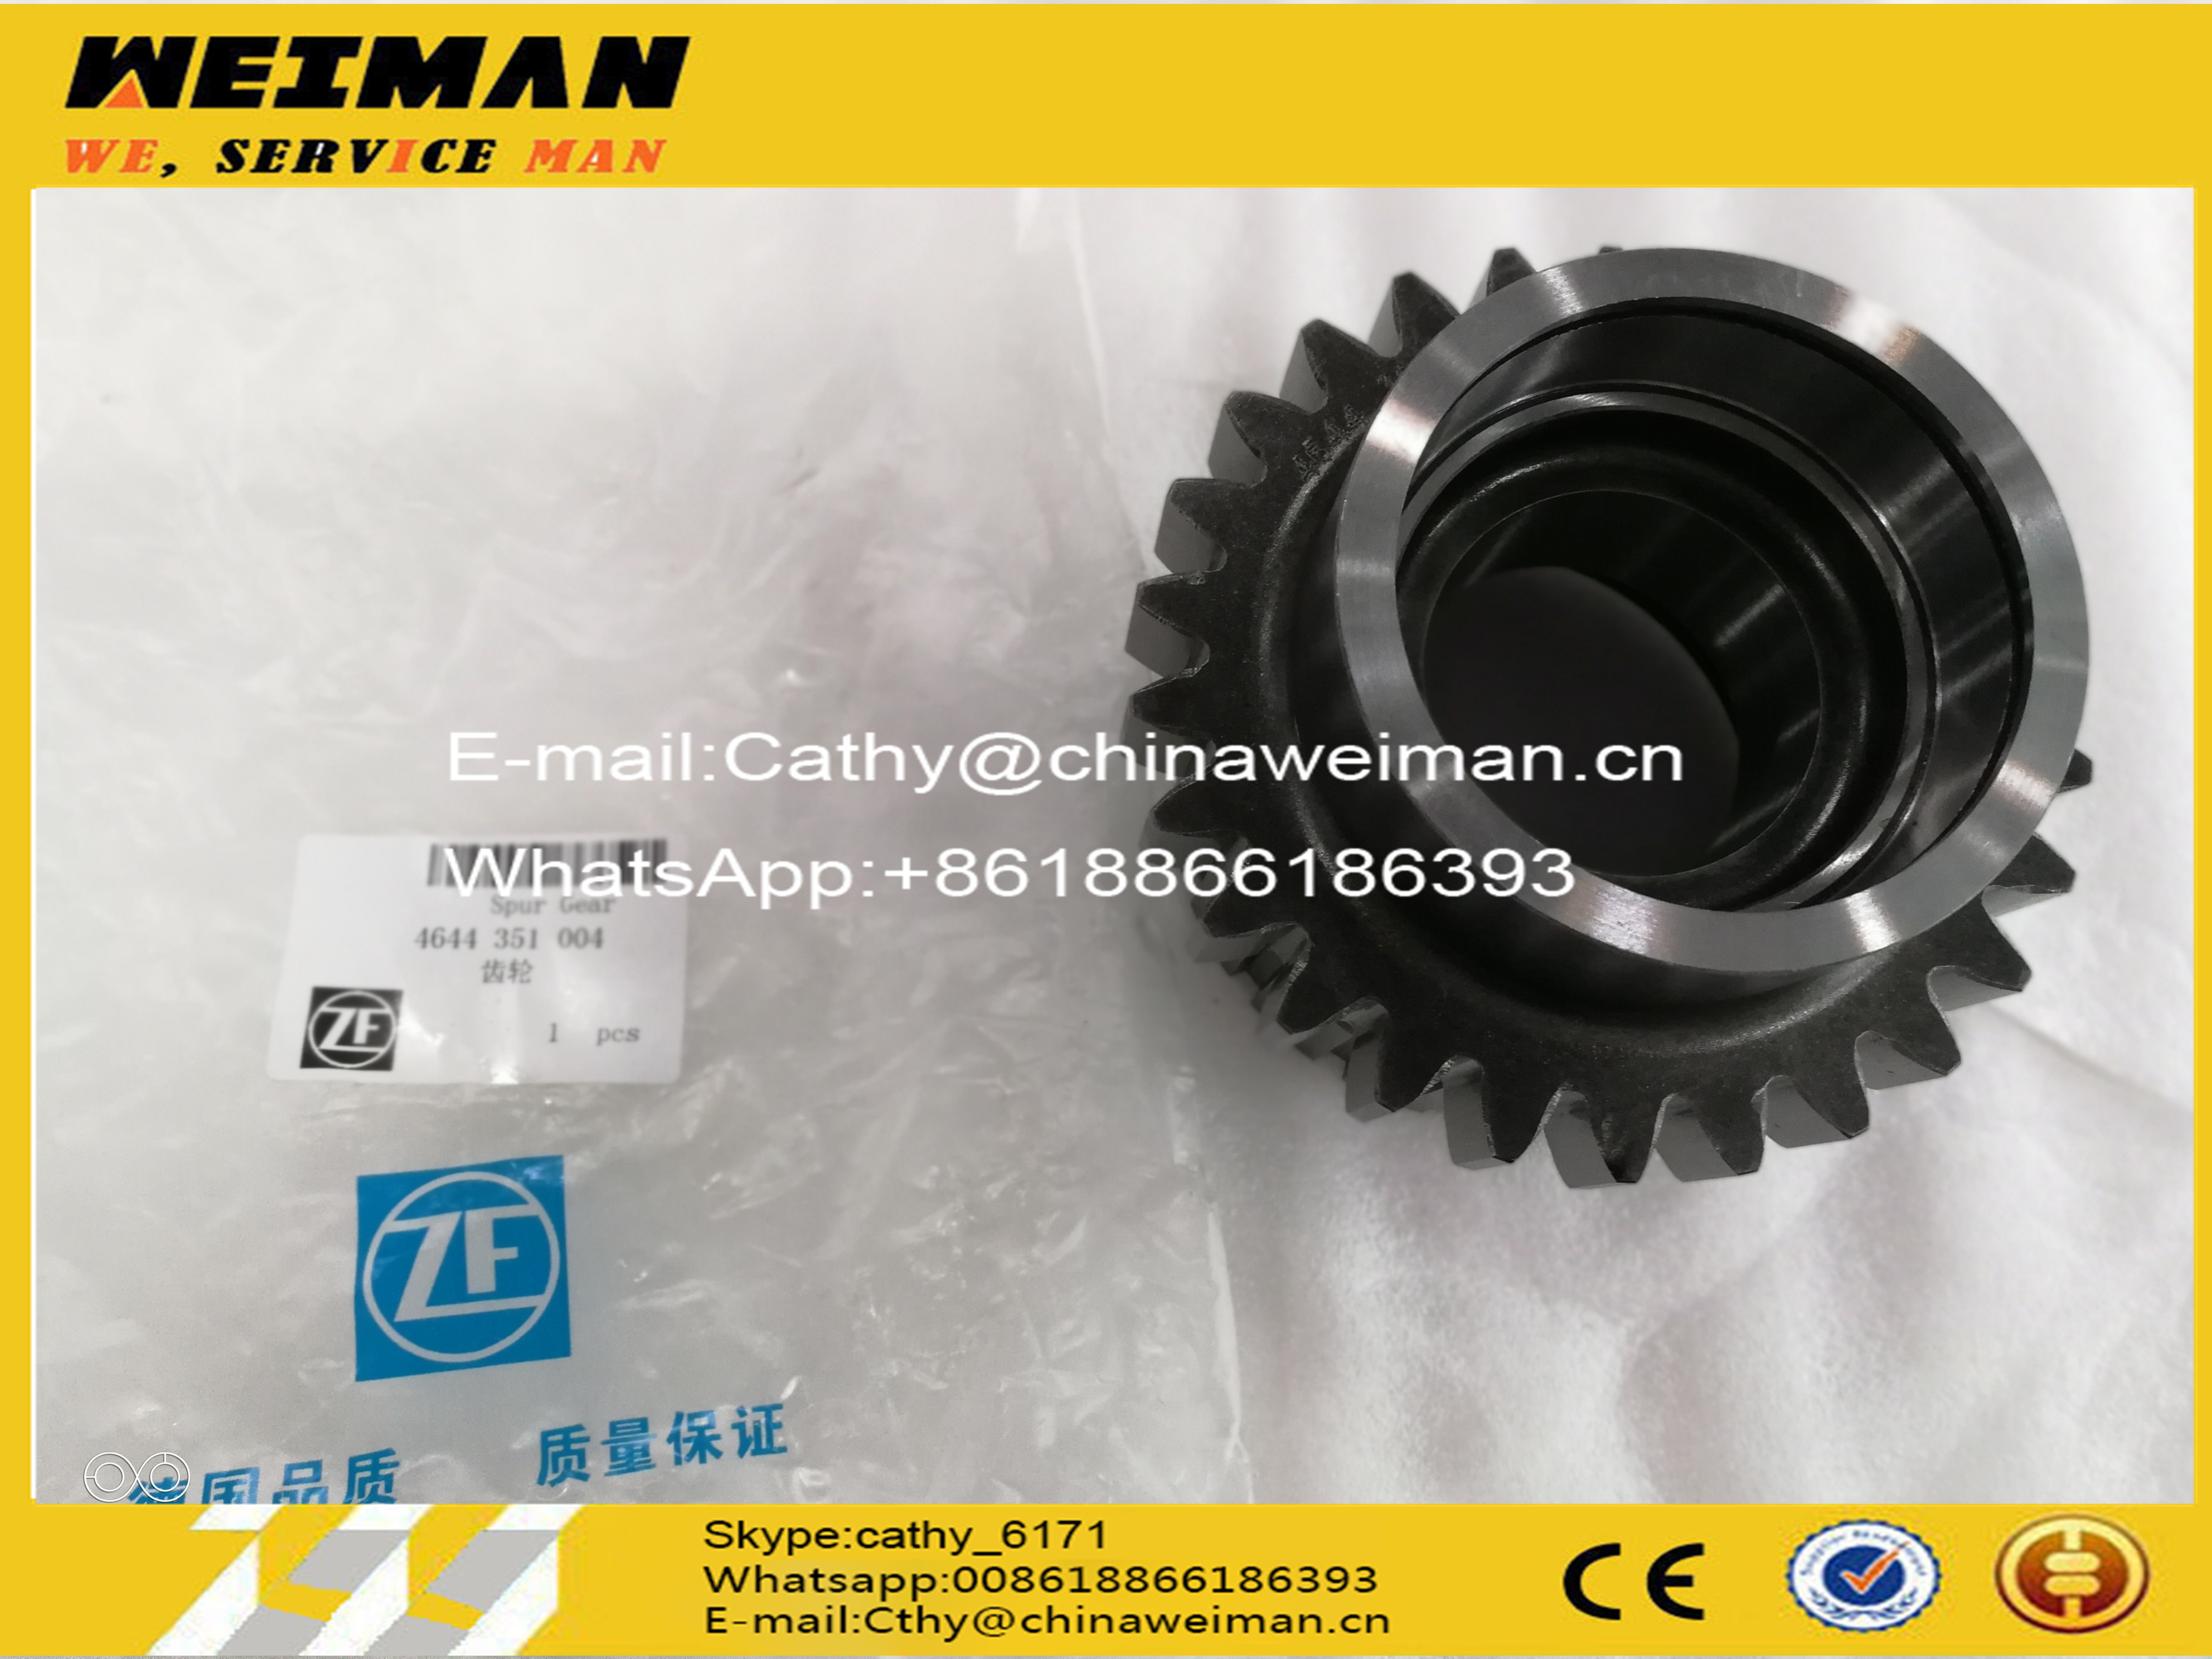 ZF 4WG200/6WG200 Transmission Gearbox Spare Parts 4644351004 SPUR GEAR